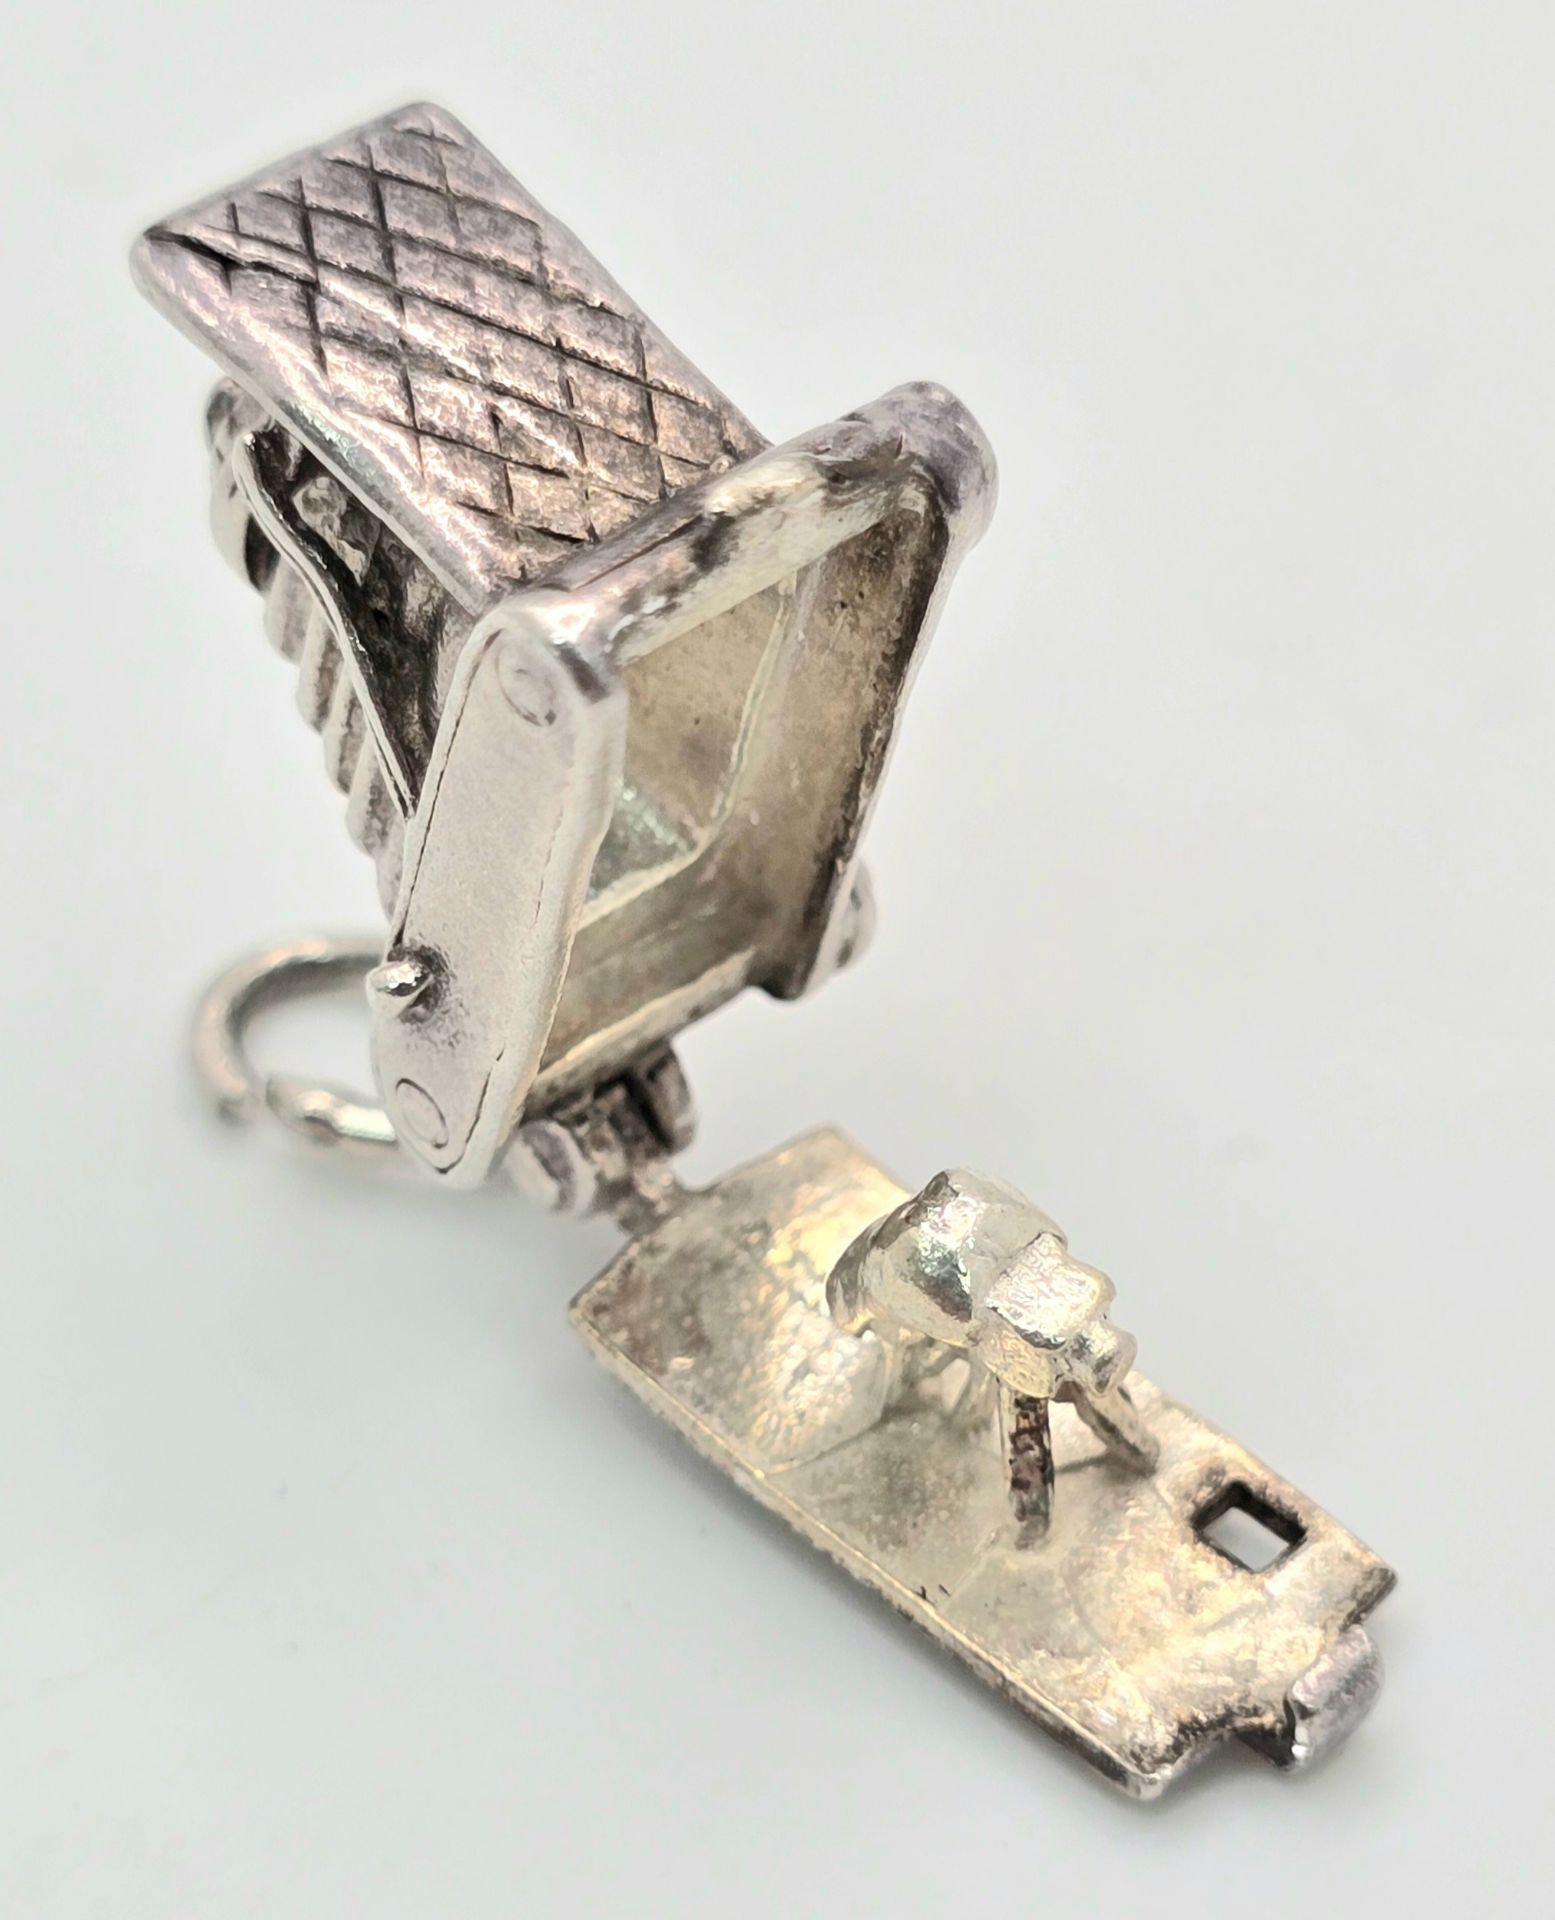 A STERLING SILVER VINTAGE CAMERA CHARM. 2.5cm length, 4.8g weight. Ref: SC 8115 - Image 2 of 4